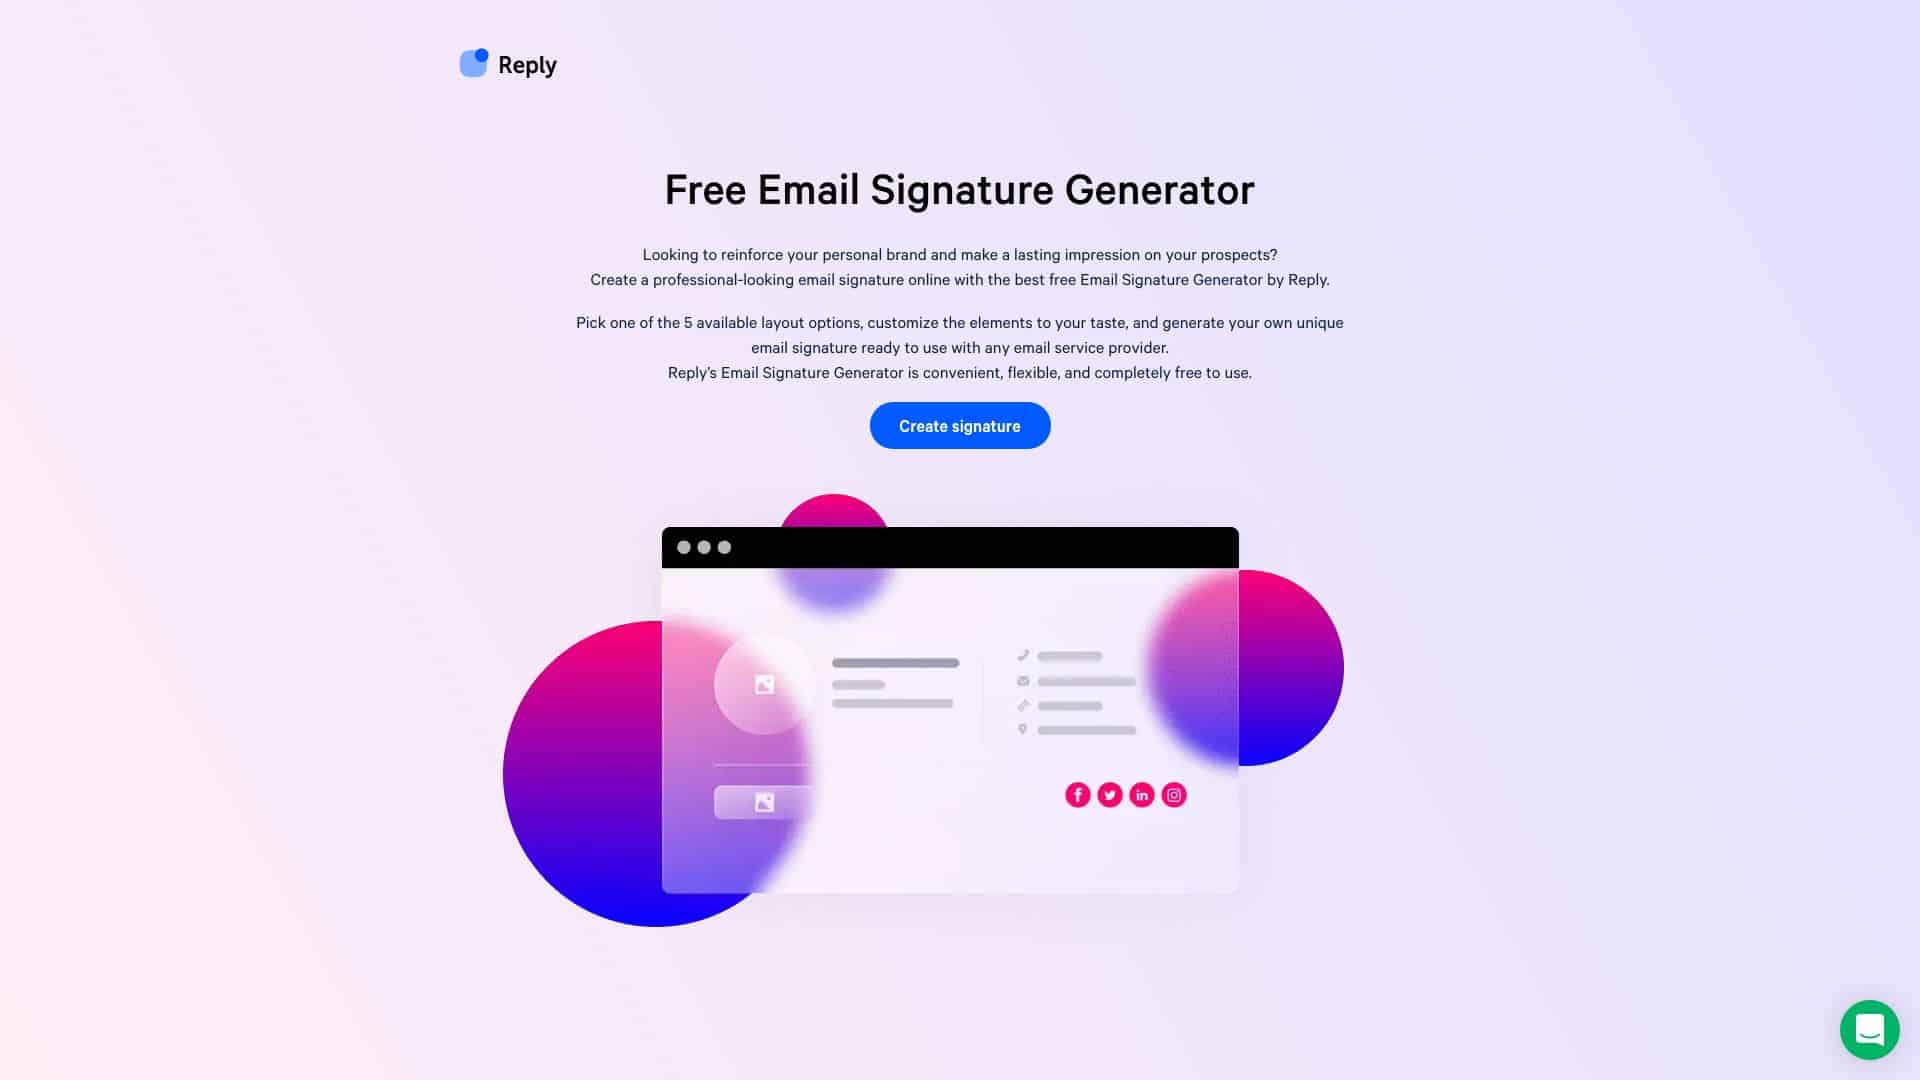 Email Signature Generator by Reply.io